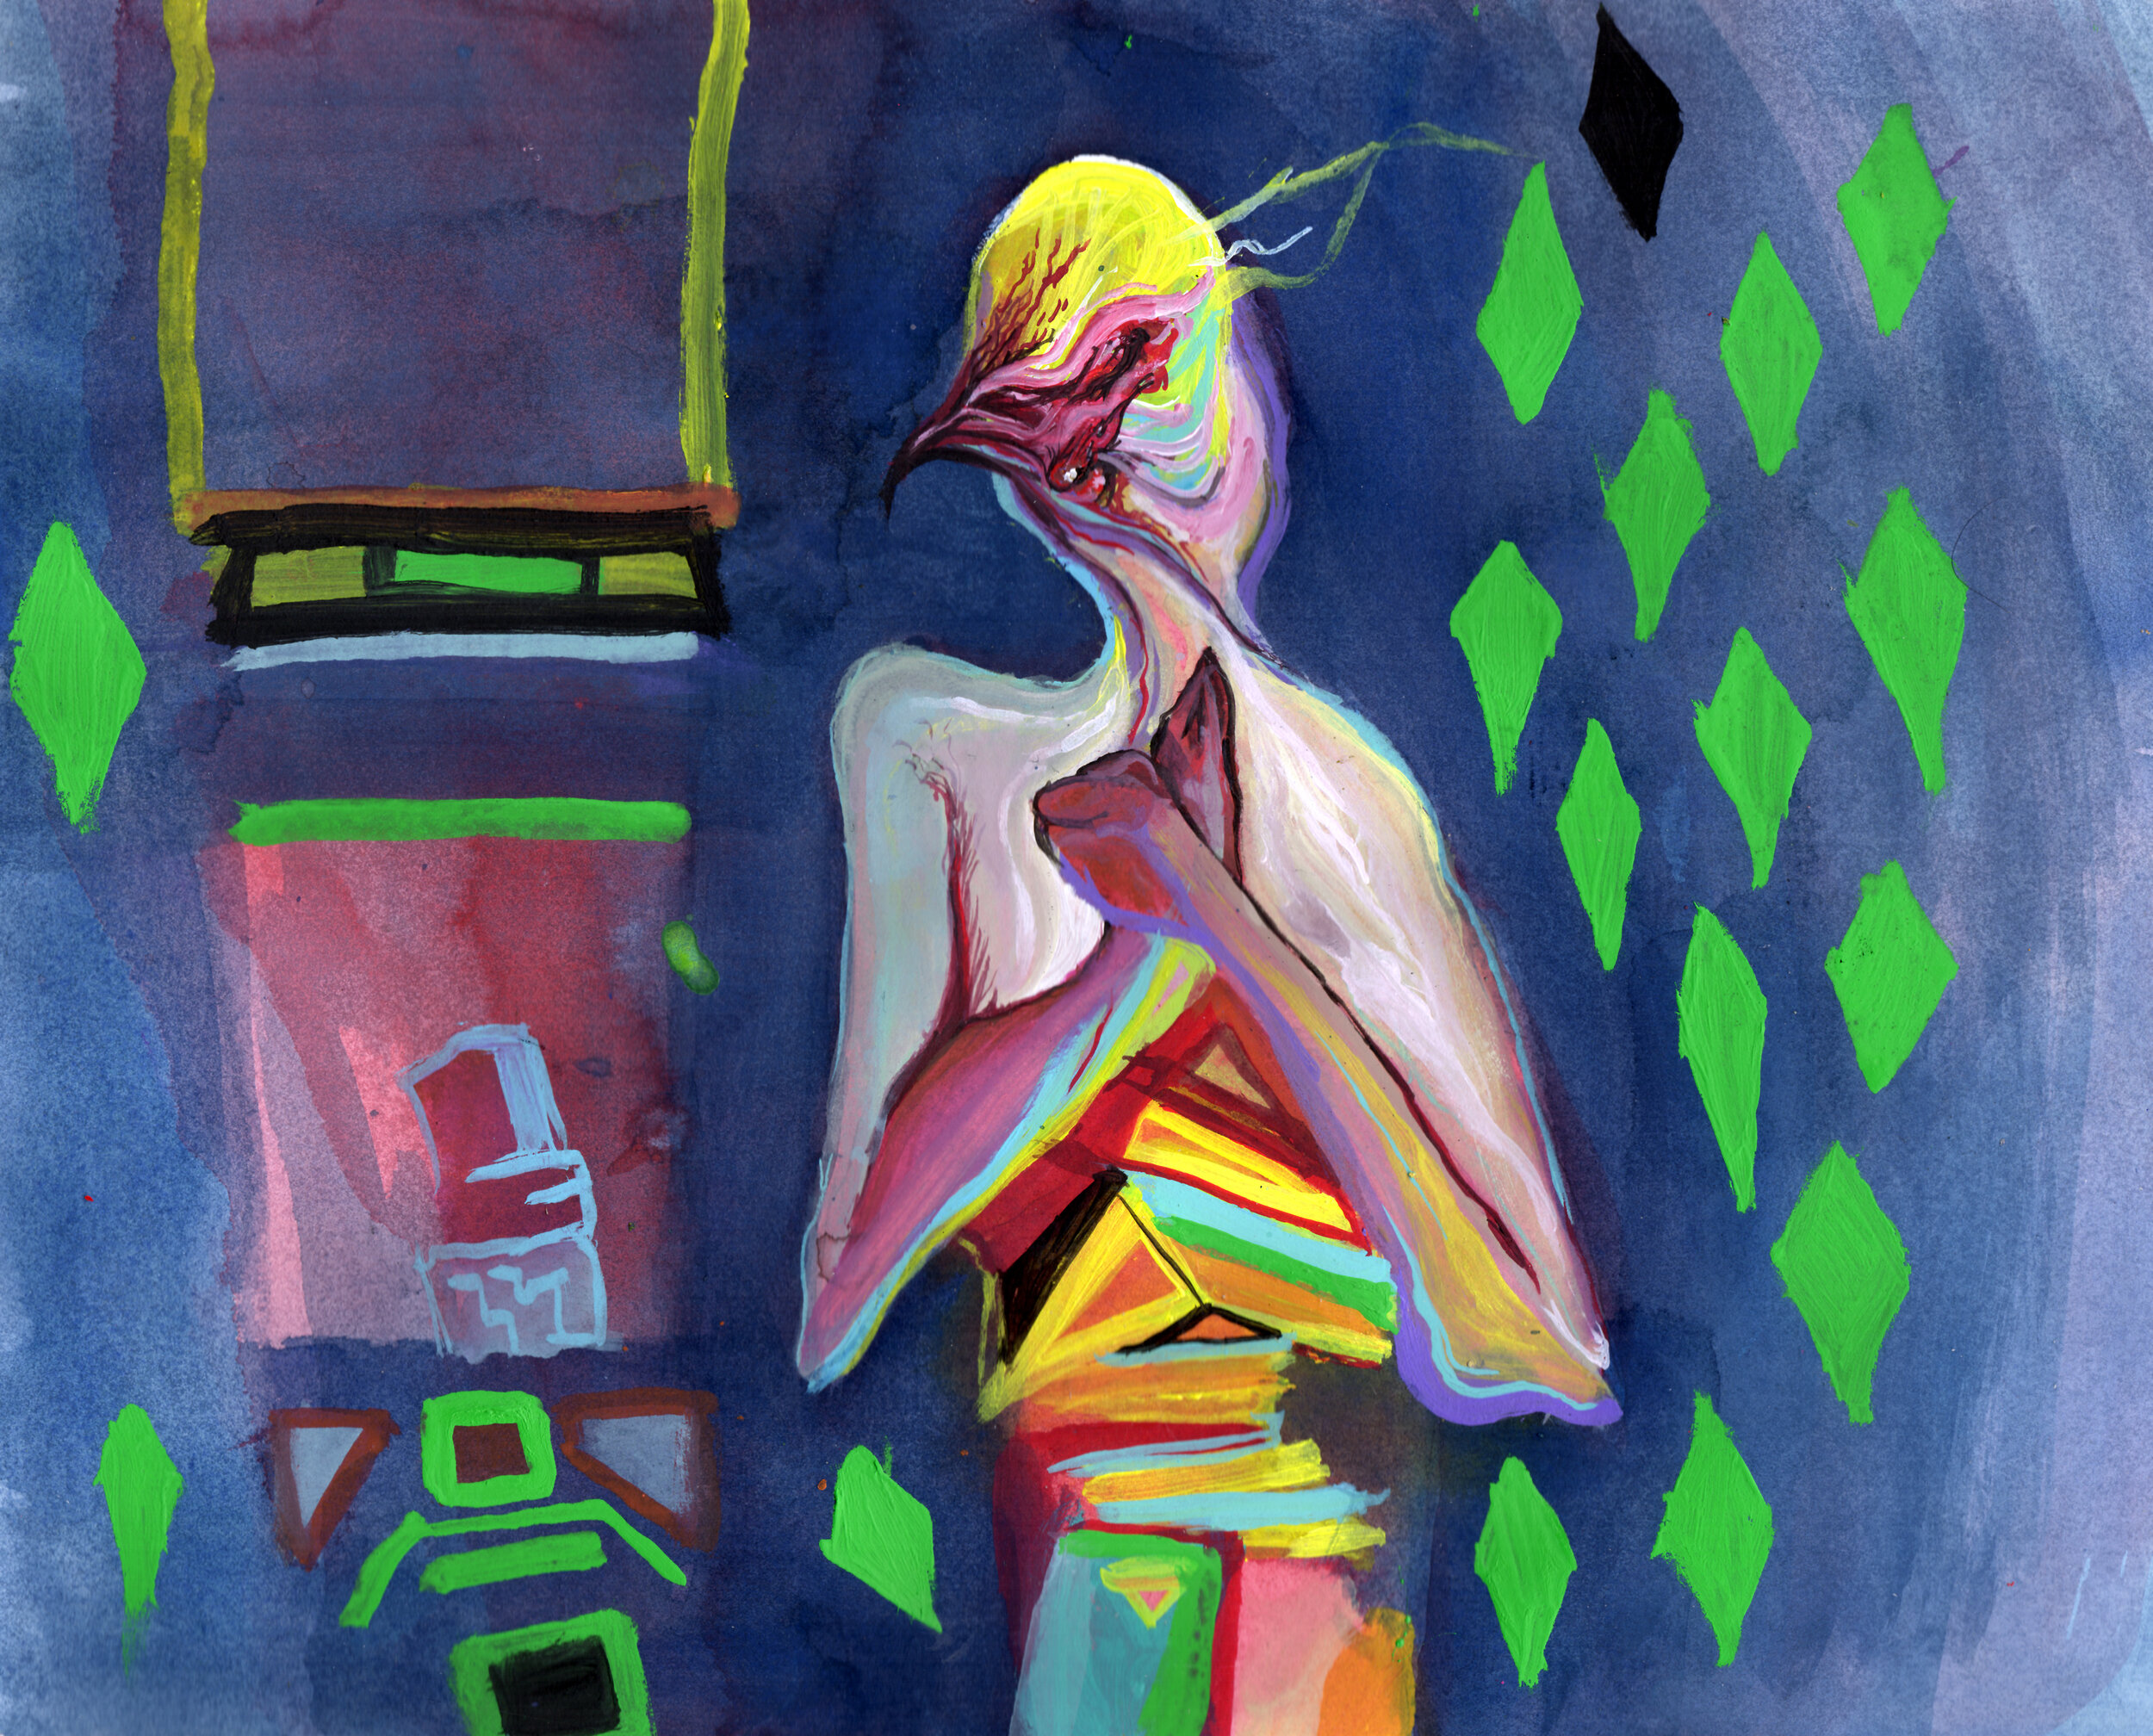   Pygmalion Interface . 2021. Watercolor and gouache on paper. 